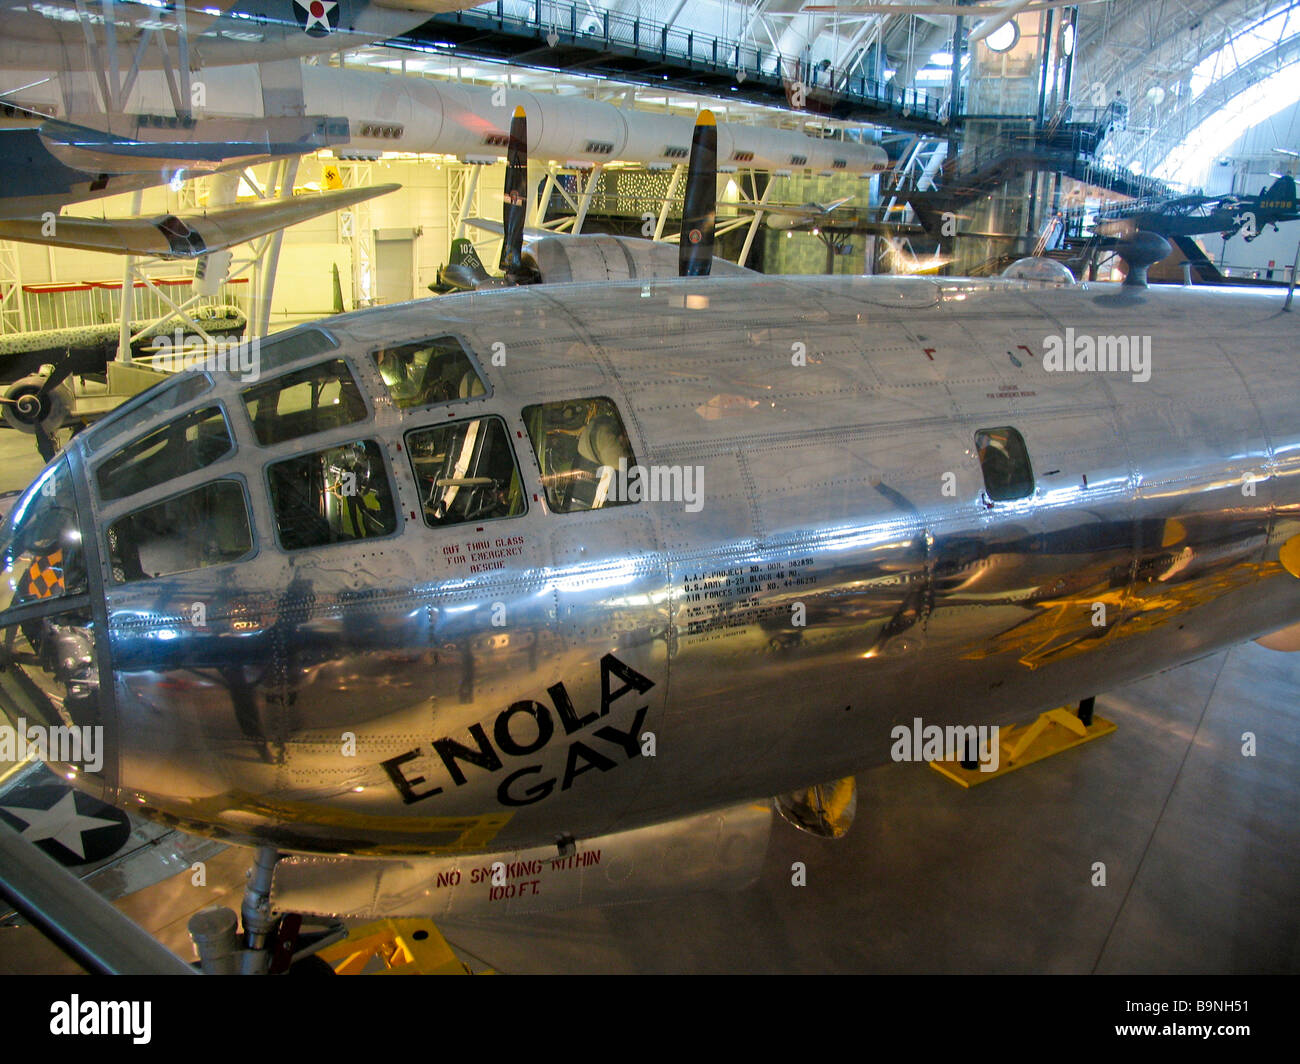 The Enola Gay the Boeing B 29 Superfortress that dropped the first atomic bomb during World War II Stock Photo